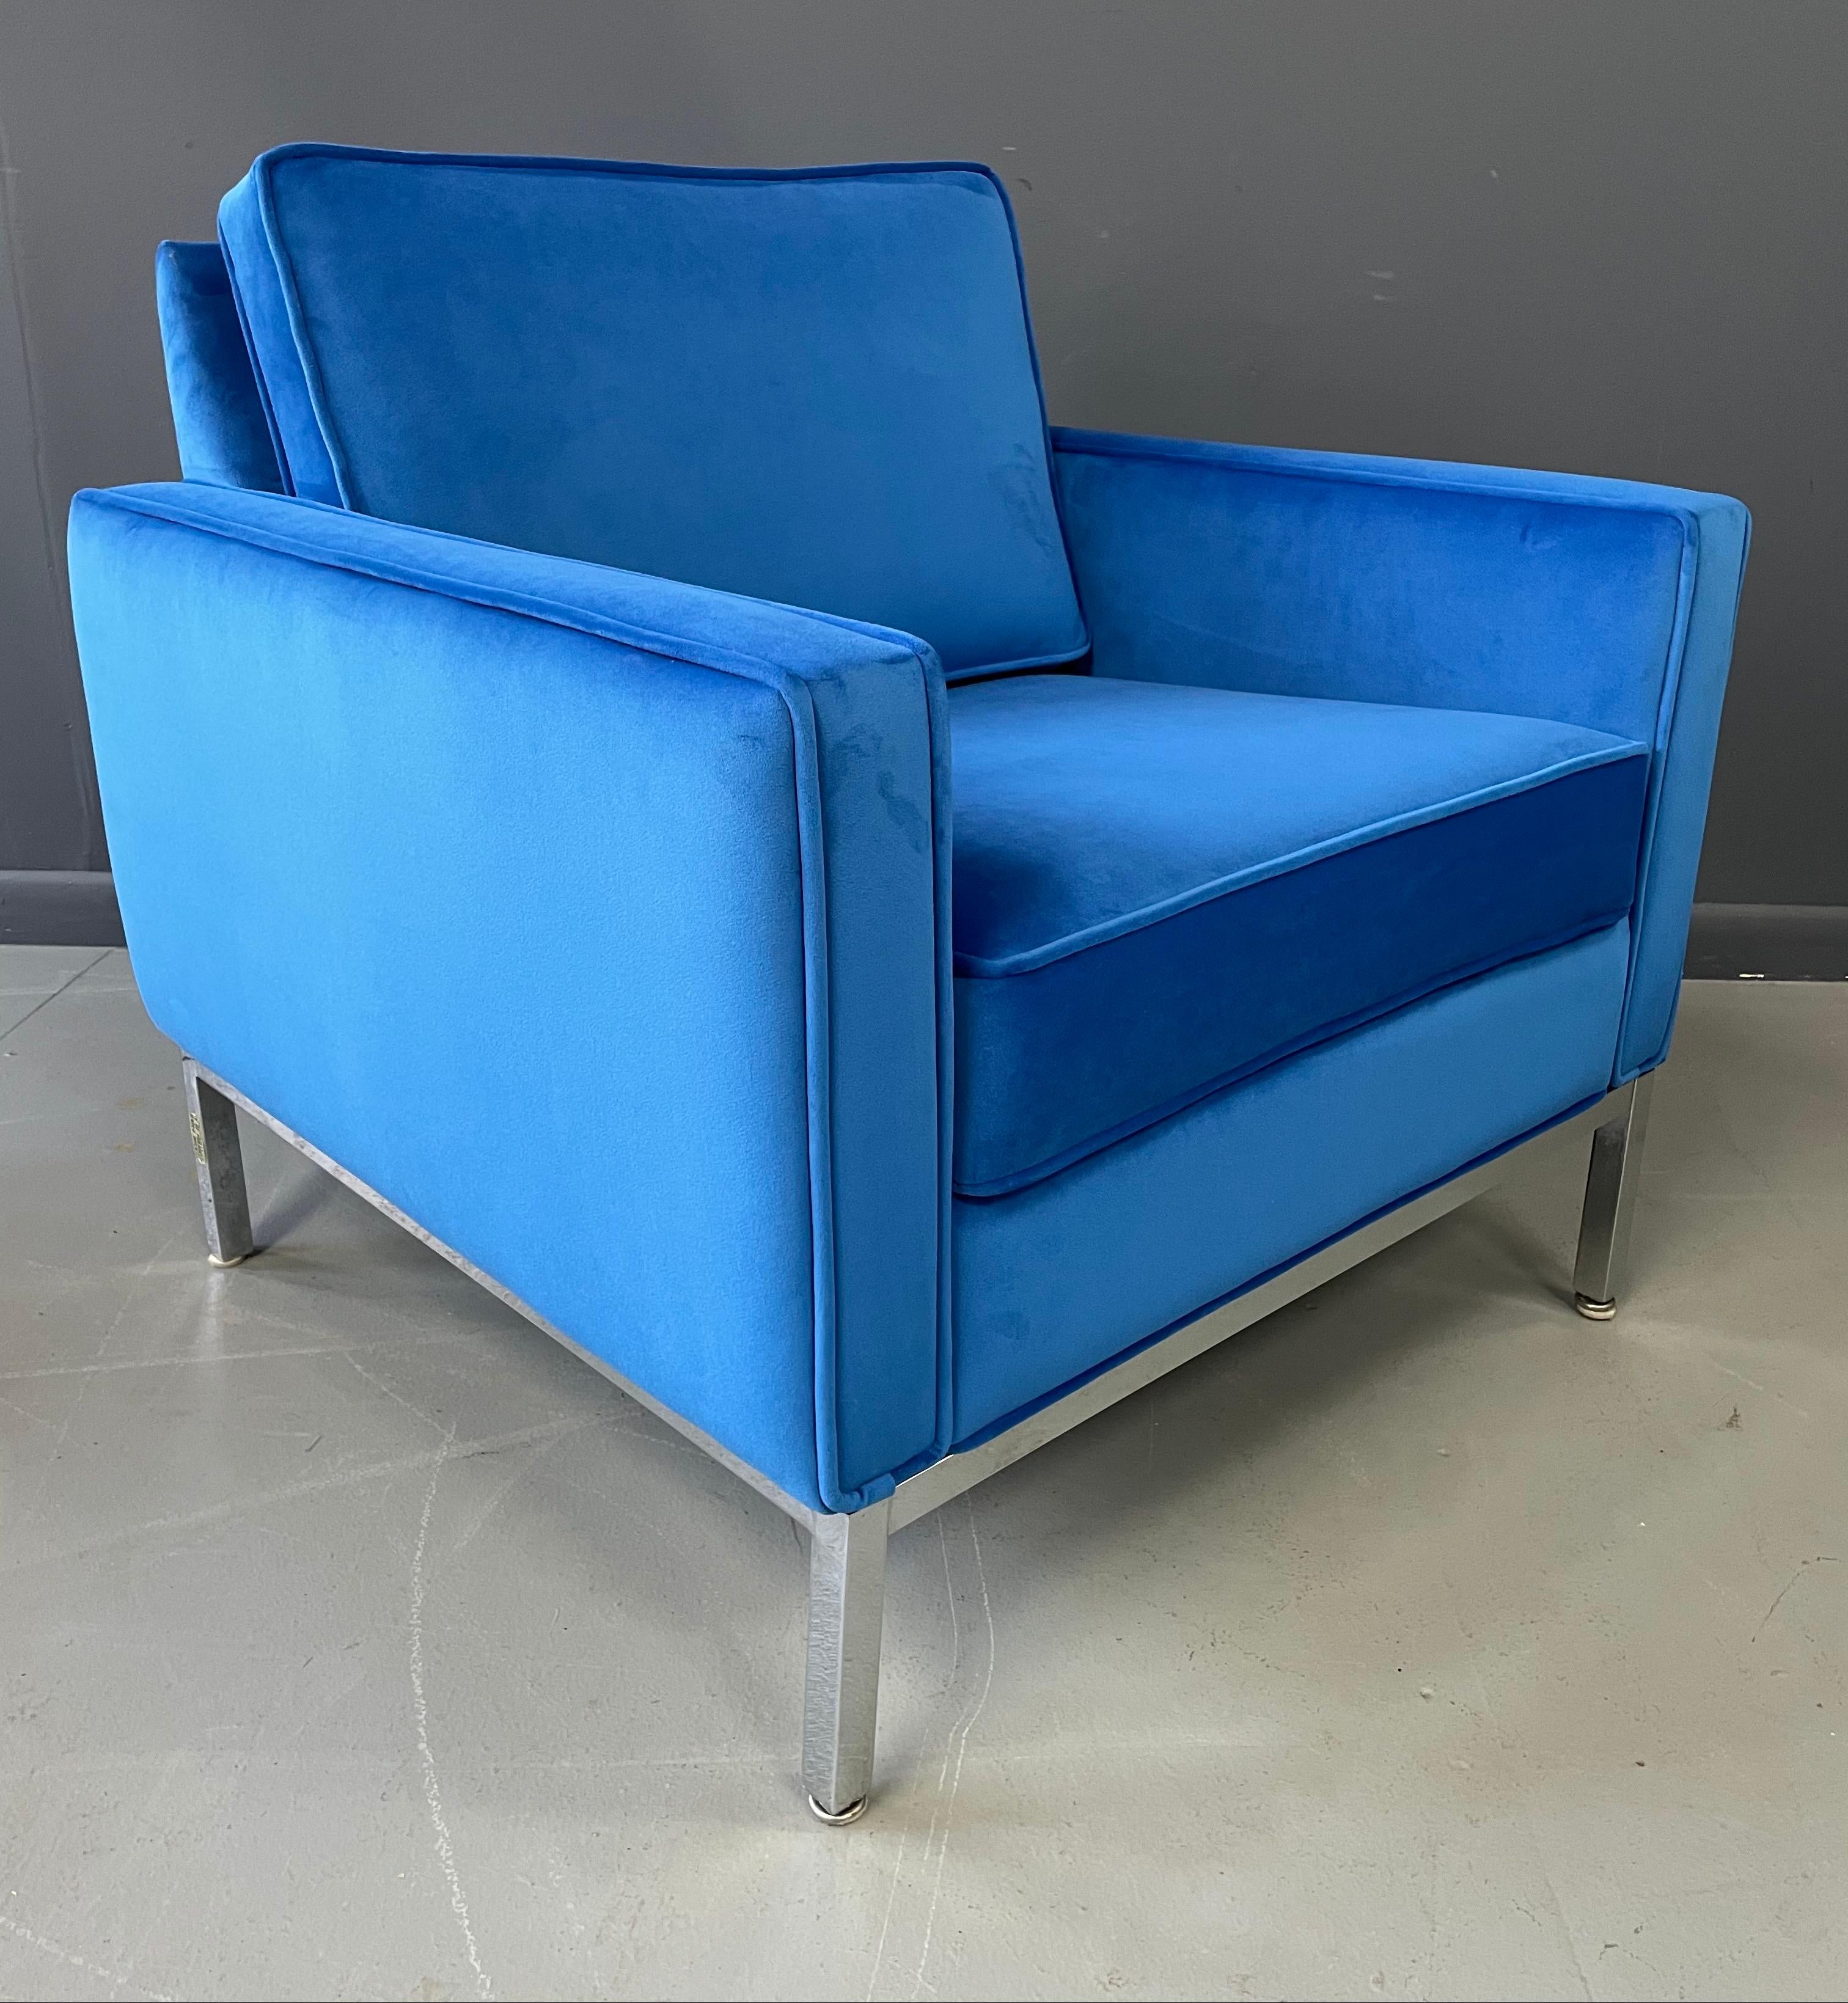 Beautiful lounge chair with generous proportions with a chromed steel frame and upholstered in a luscious blue velvet.